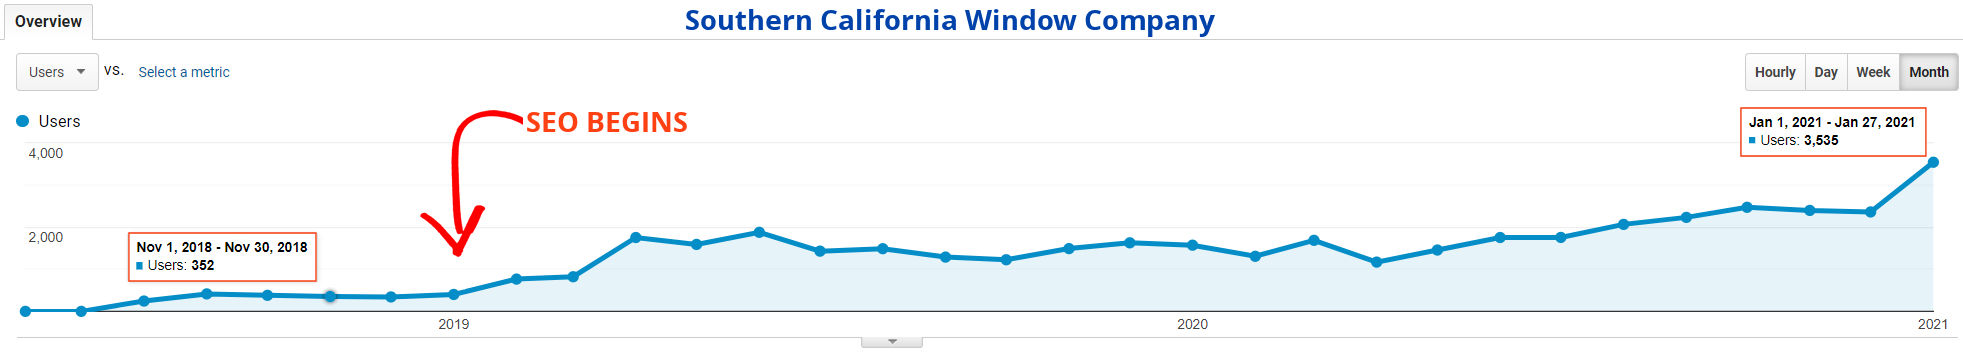 Revolutionary SEO Success: 350 to 3,500 Monthly Visitors, 900% Increase in 2 Years for SoCal Window Company